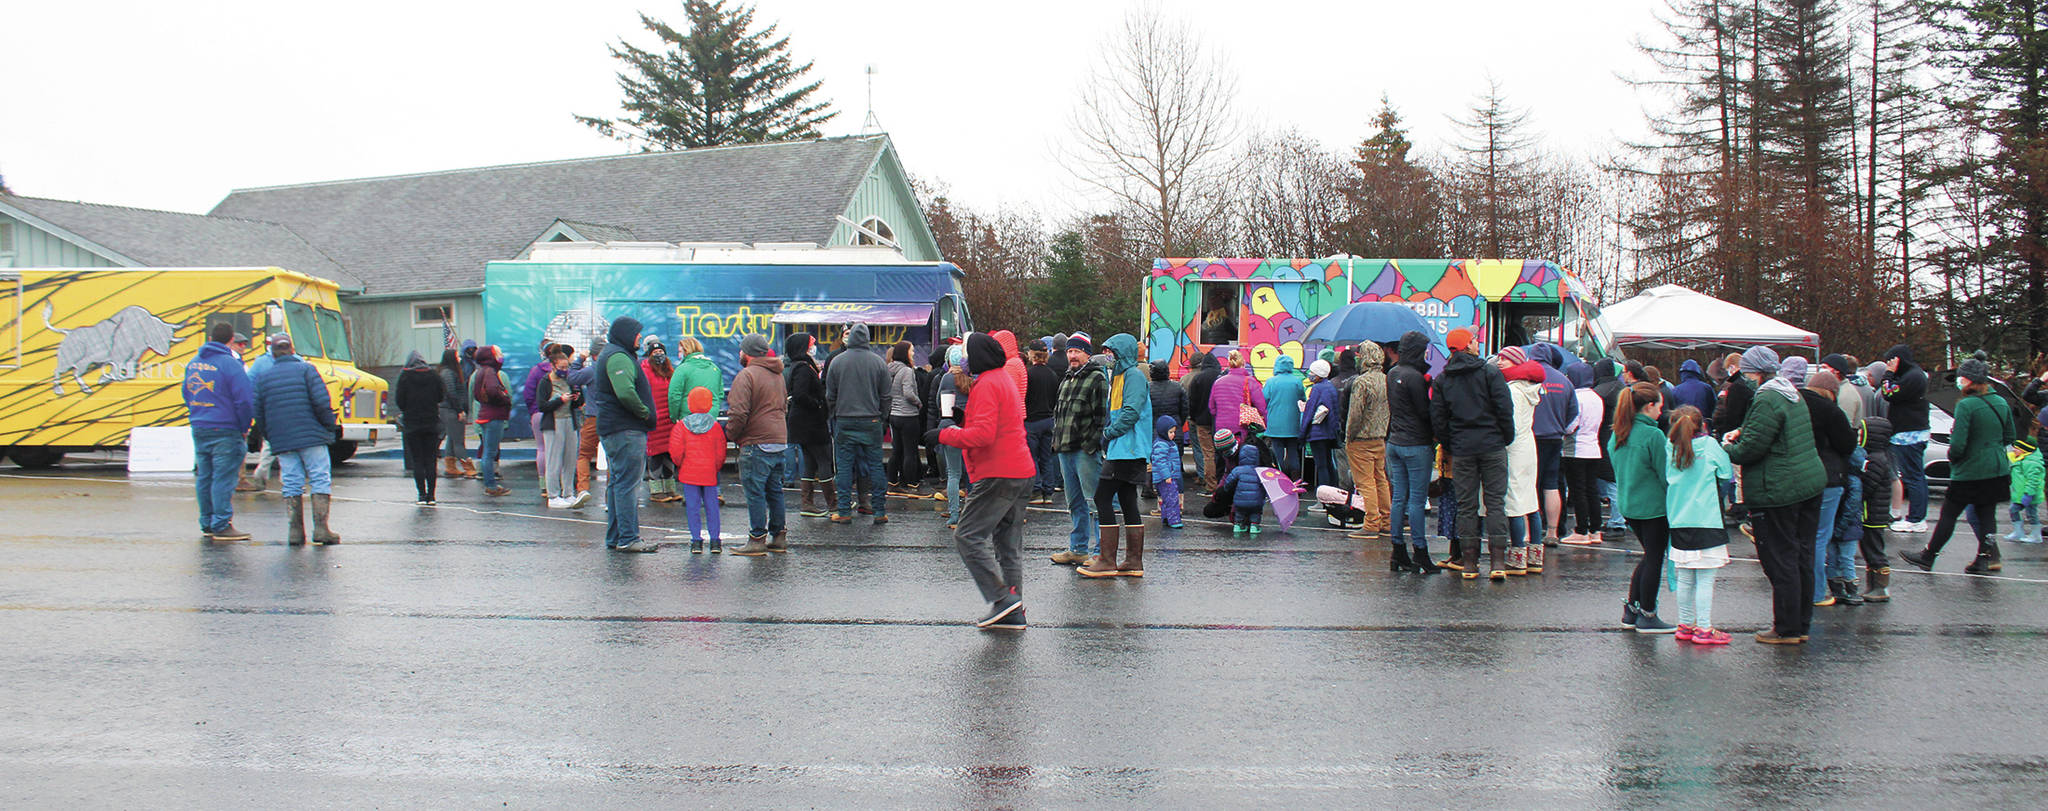 People wait in line to eat from three different visiting food trucks on Sunday, Nov. 8 at the Homer Chamber of Commerce & Visitor Center in Homer. Five food trucks came to town as part of the Food Network show “The Great Food Truck Race.” (Photo by Megan Pacer/Homer News)